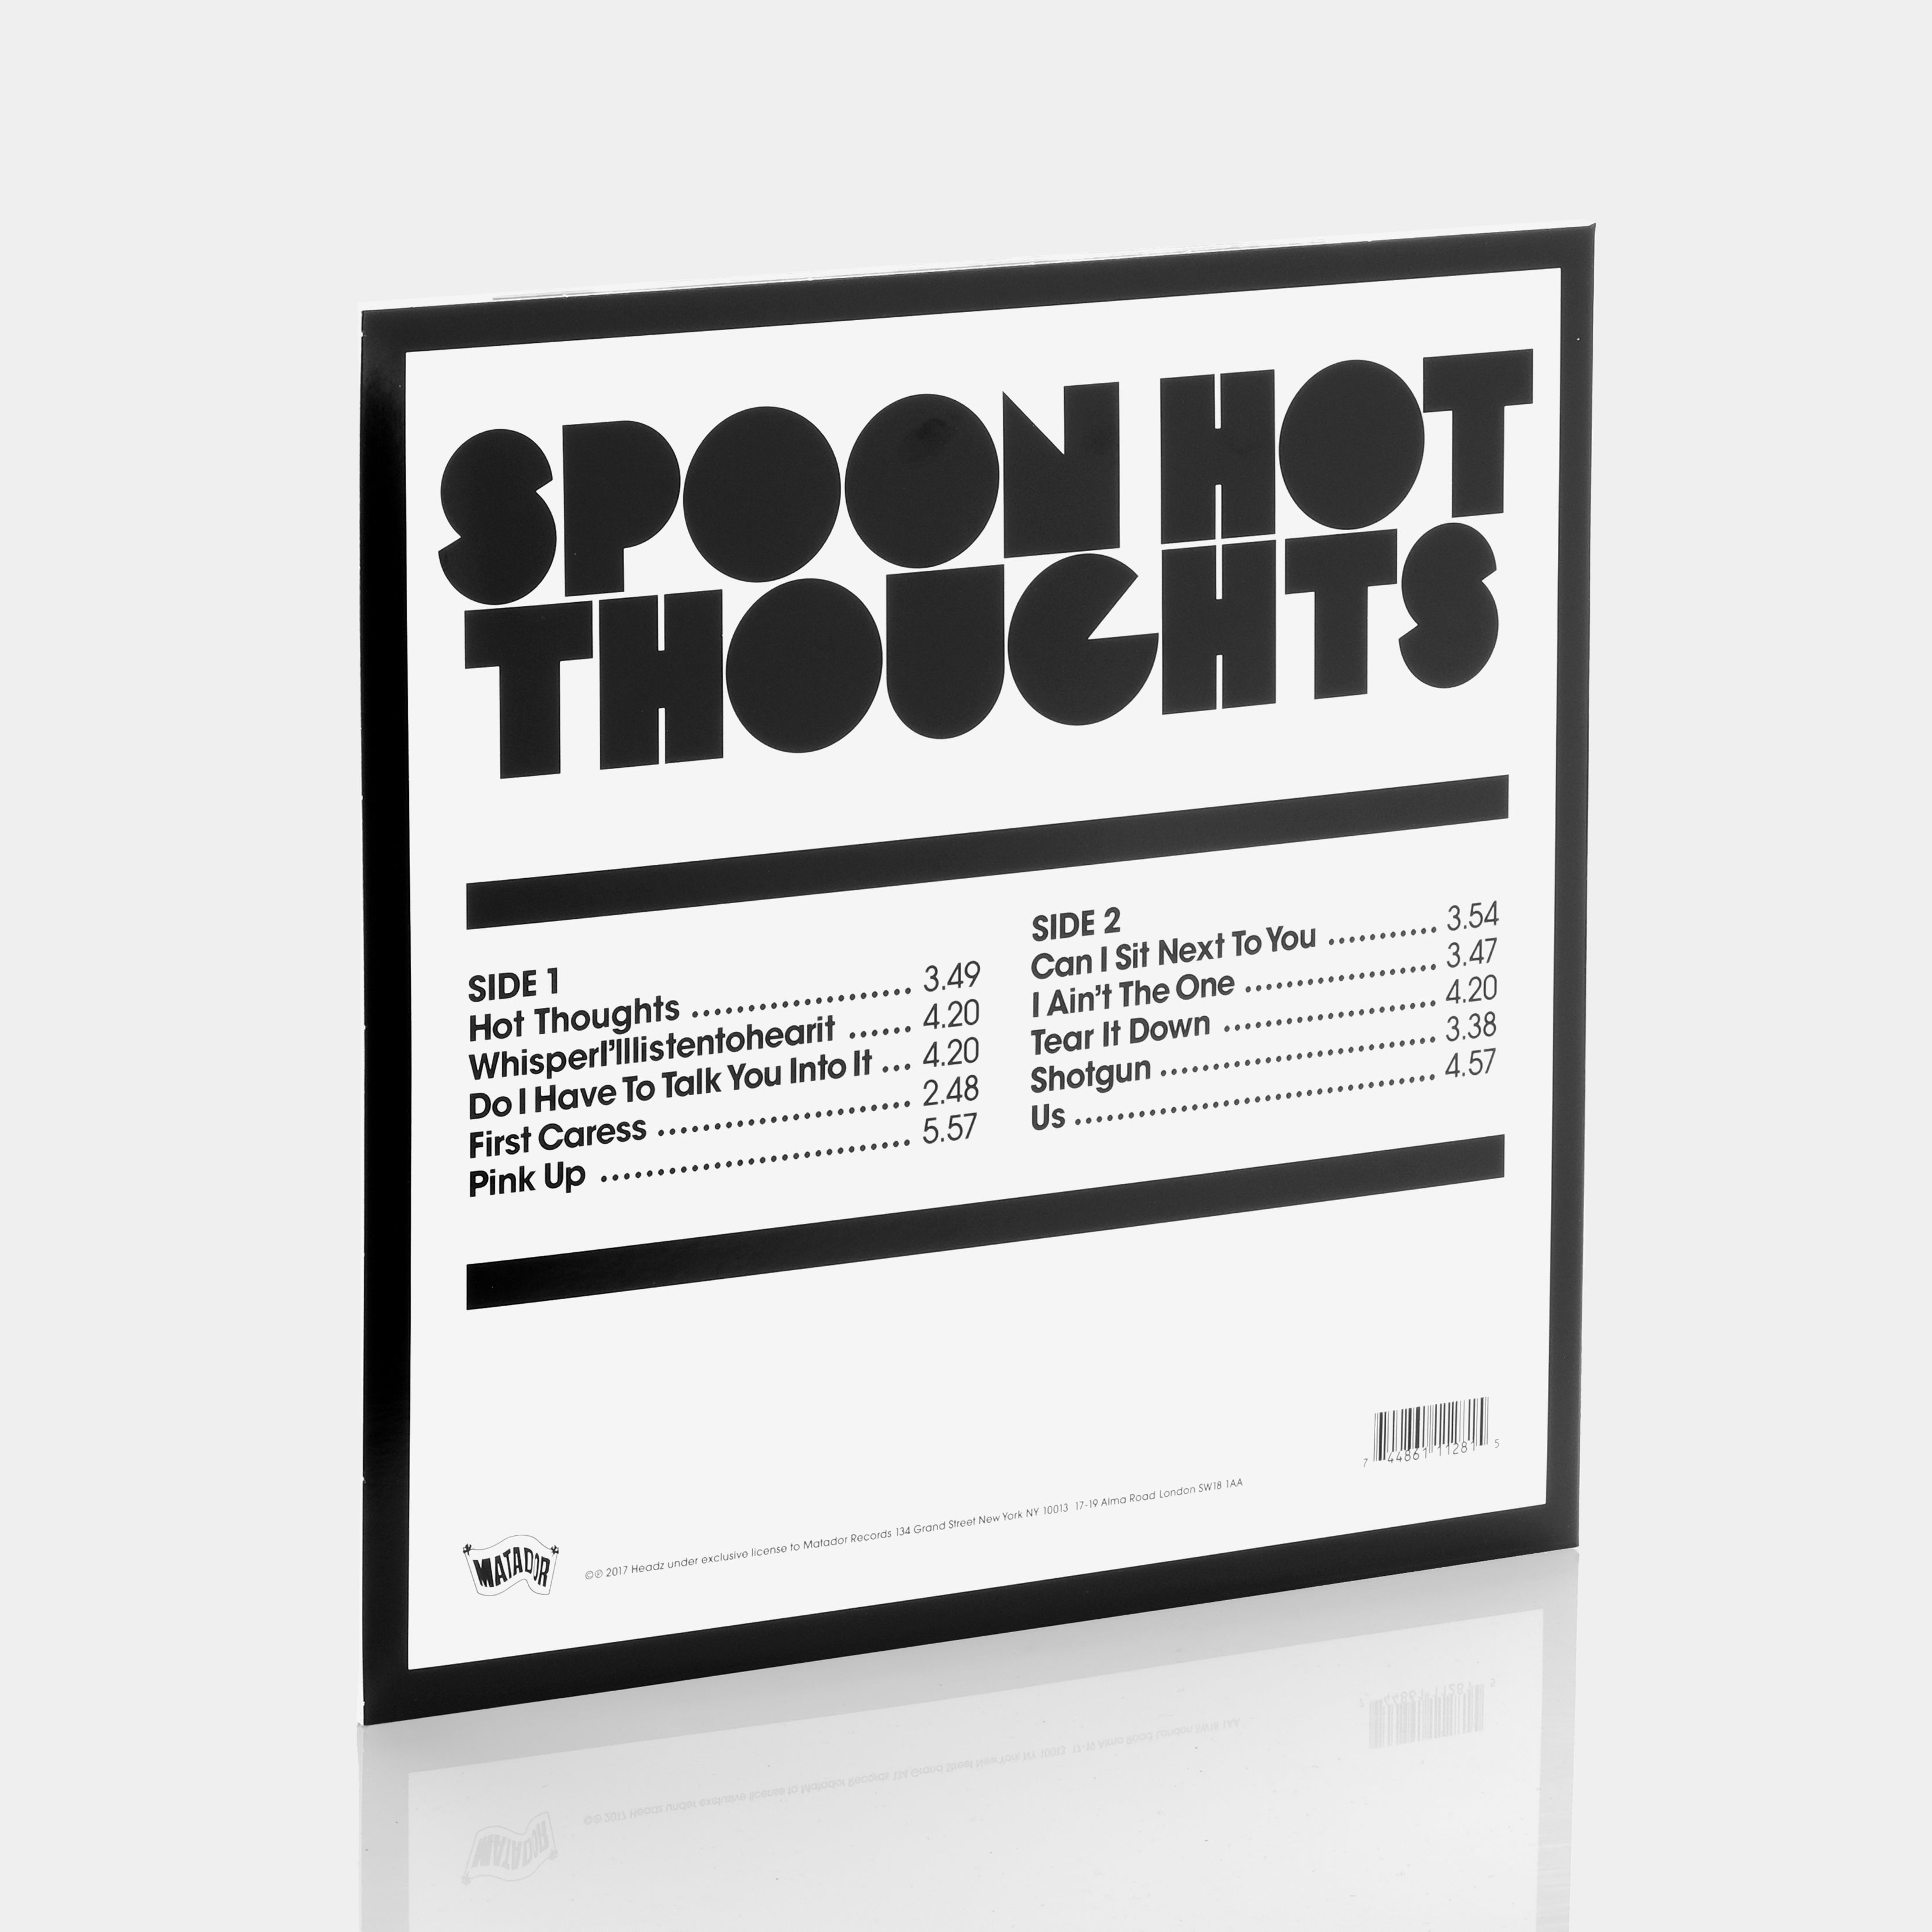 Spoon - Hot Thoughts LP Vinyl Record